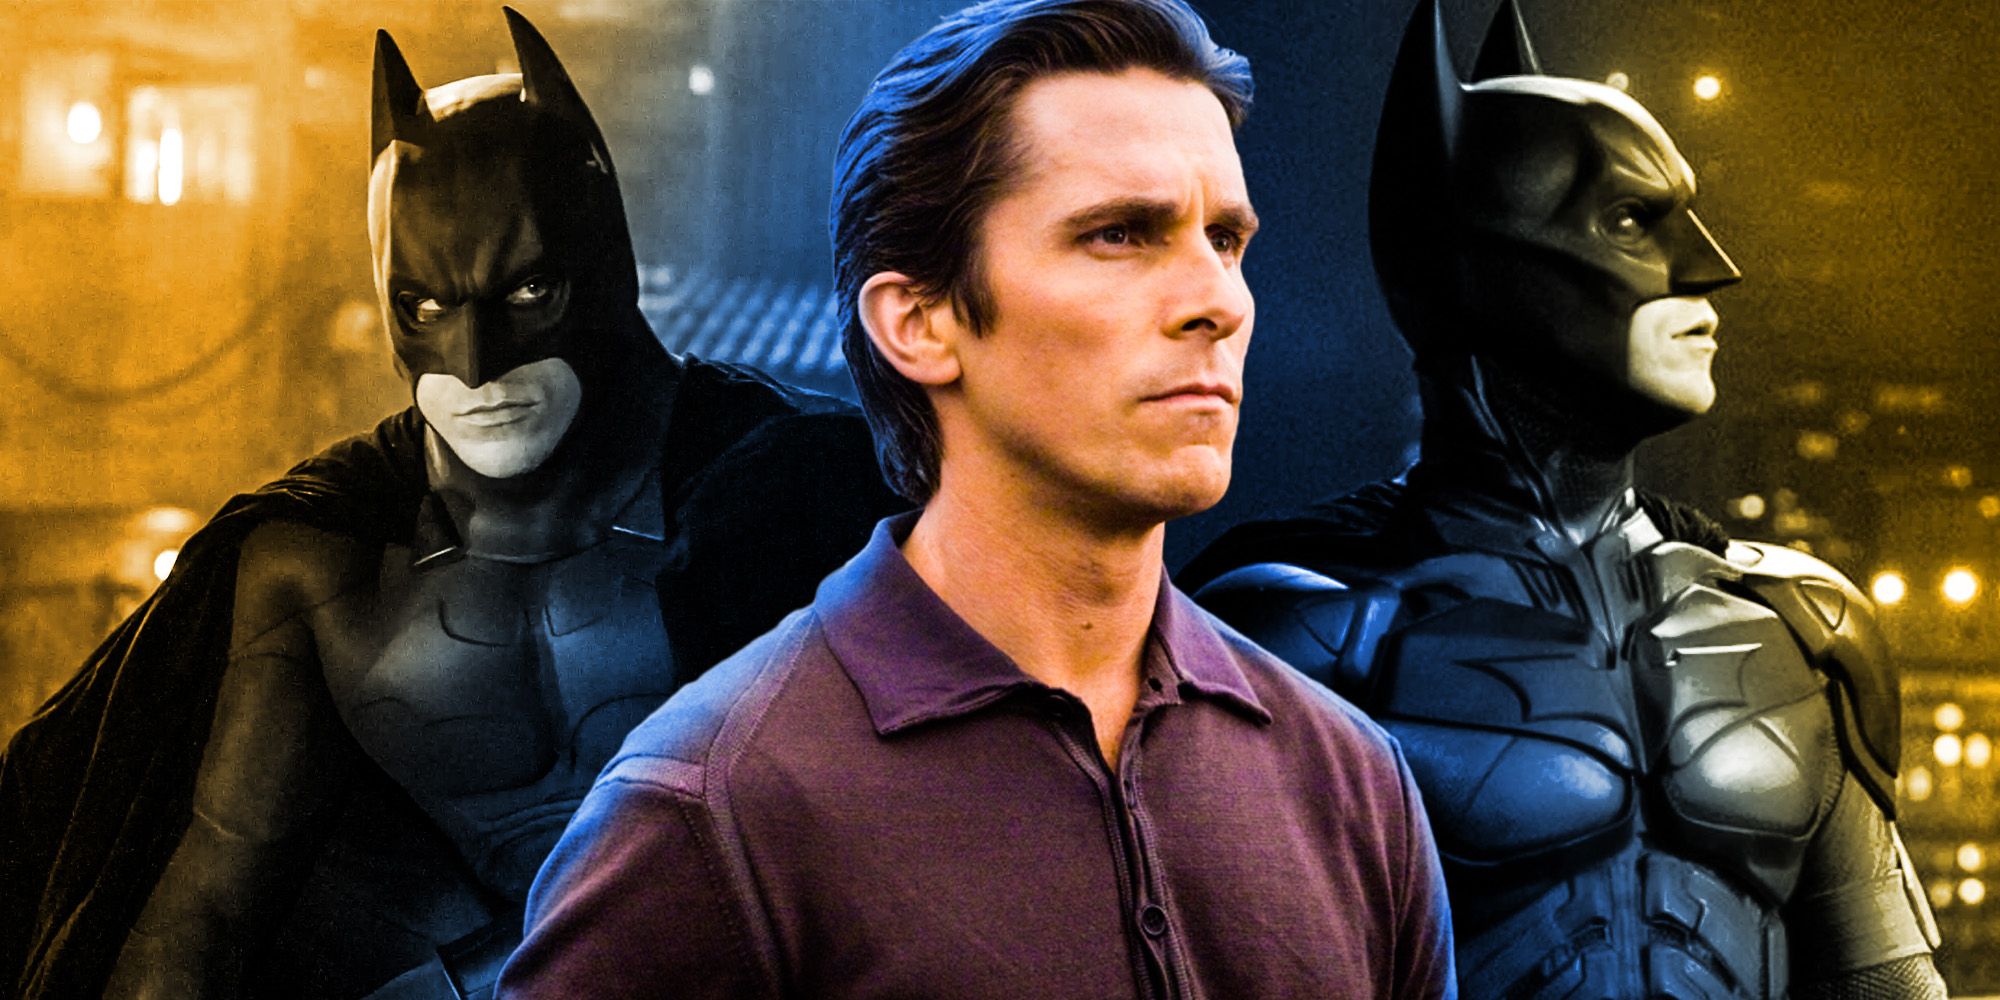 The Dark Knight 4 Is Impossible After Christopher Nolan's Superhero ...